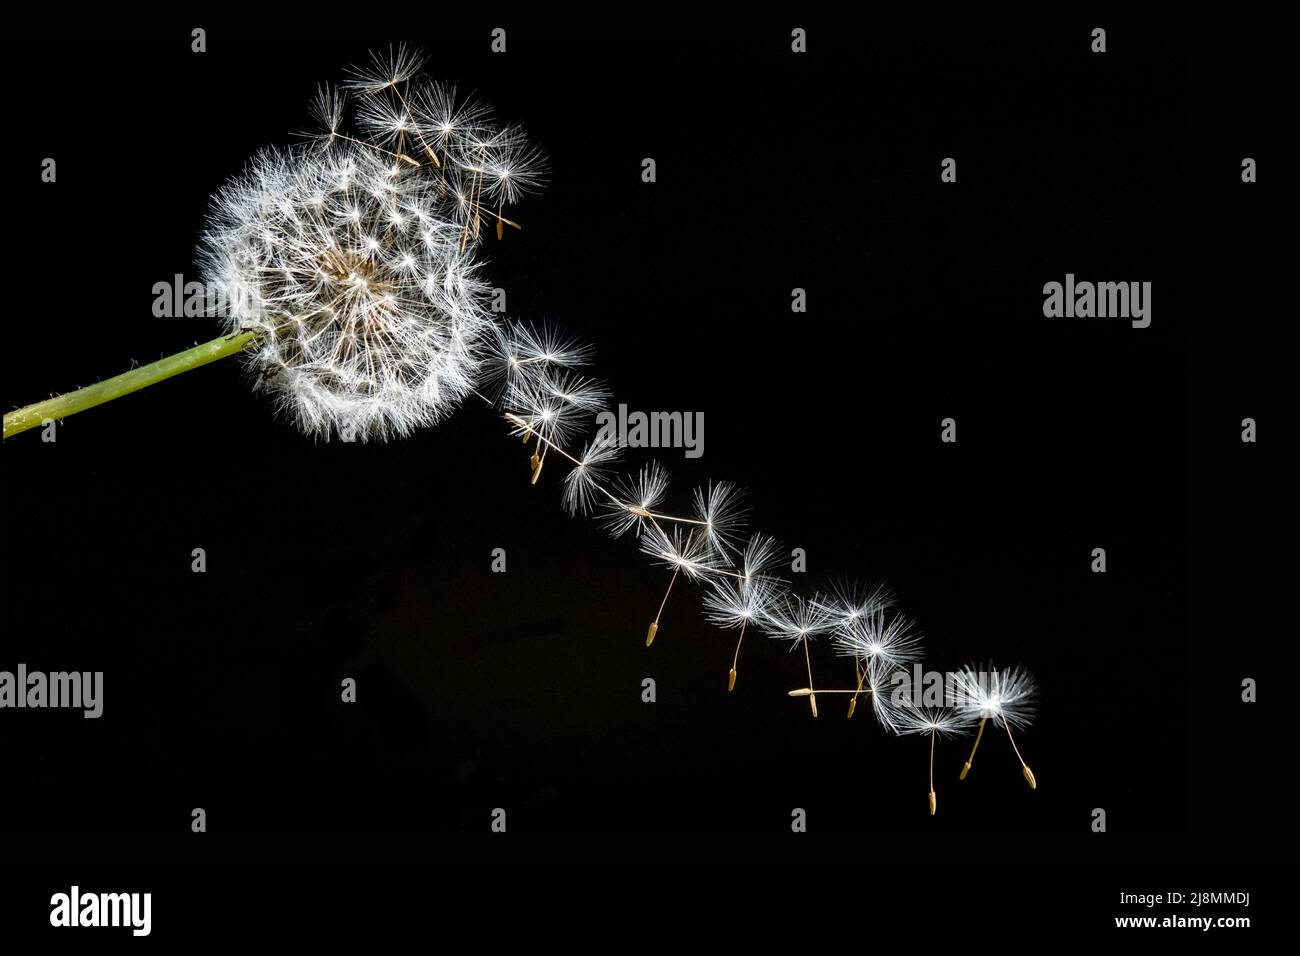 dandelion blowball with flying seeds on black background Stock Photo